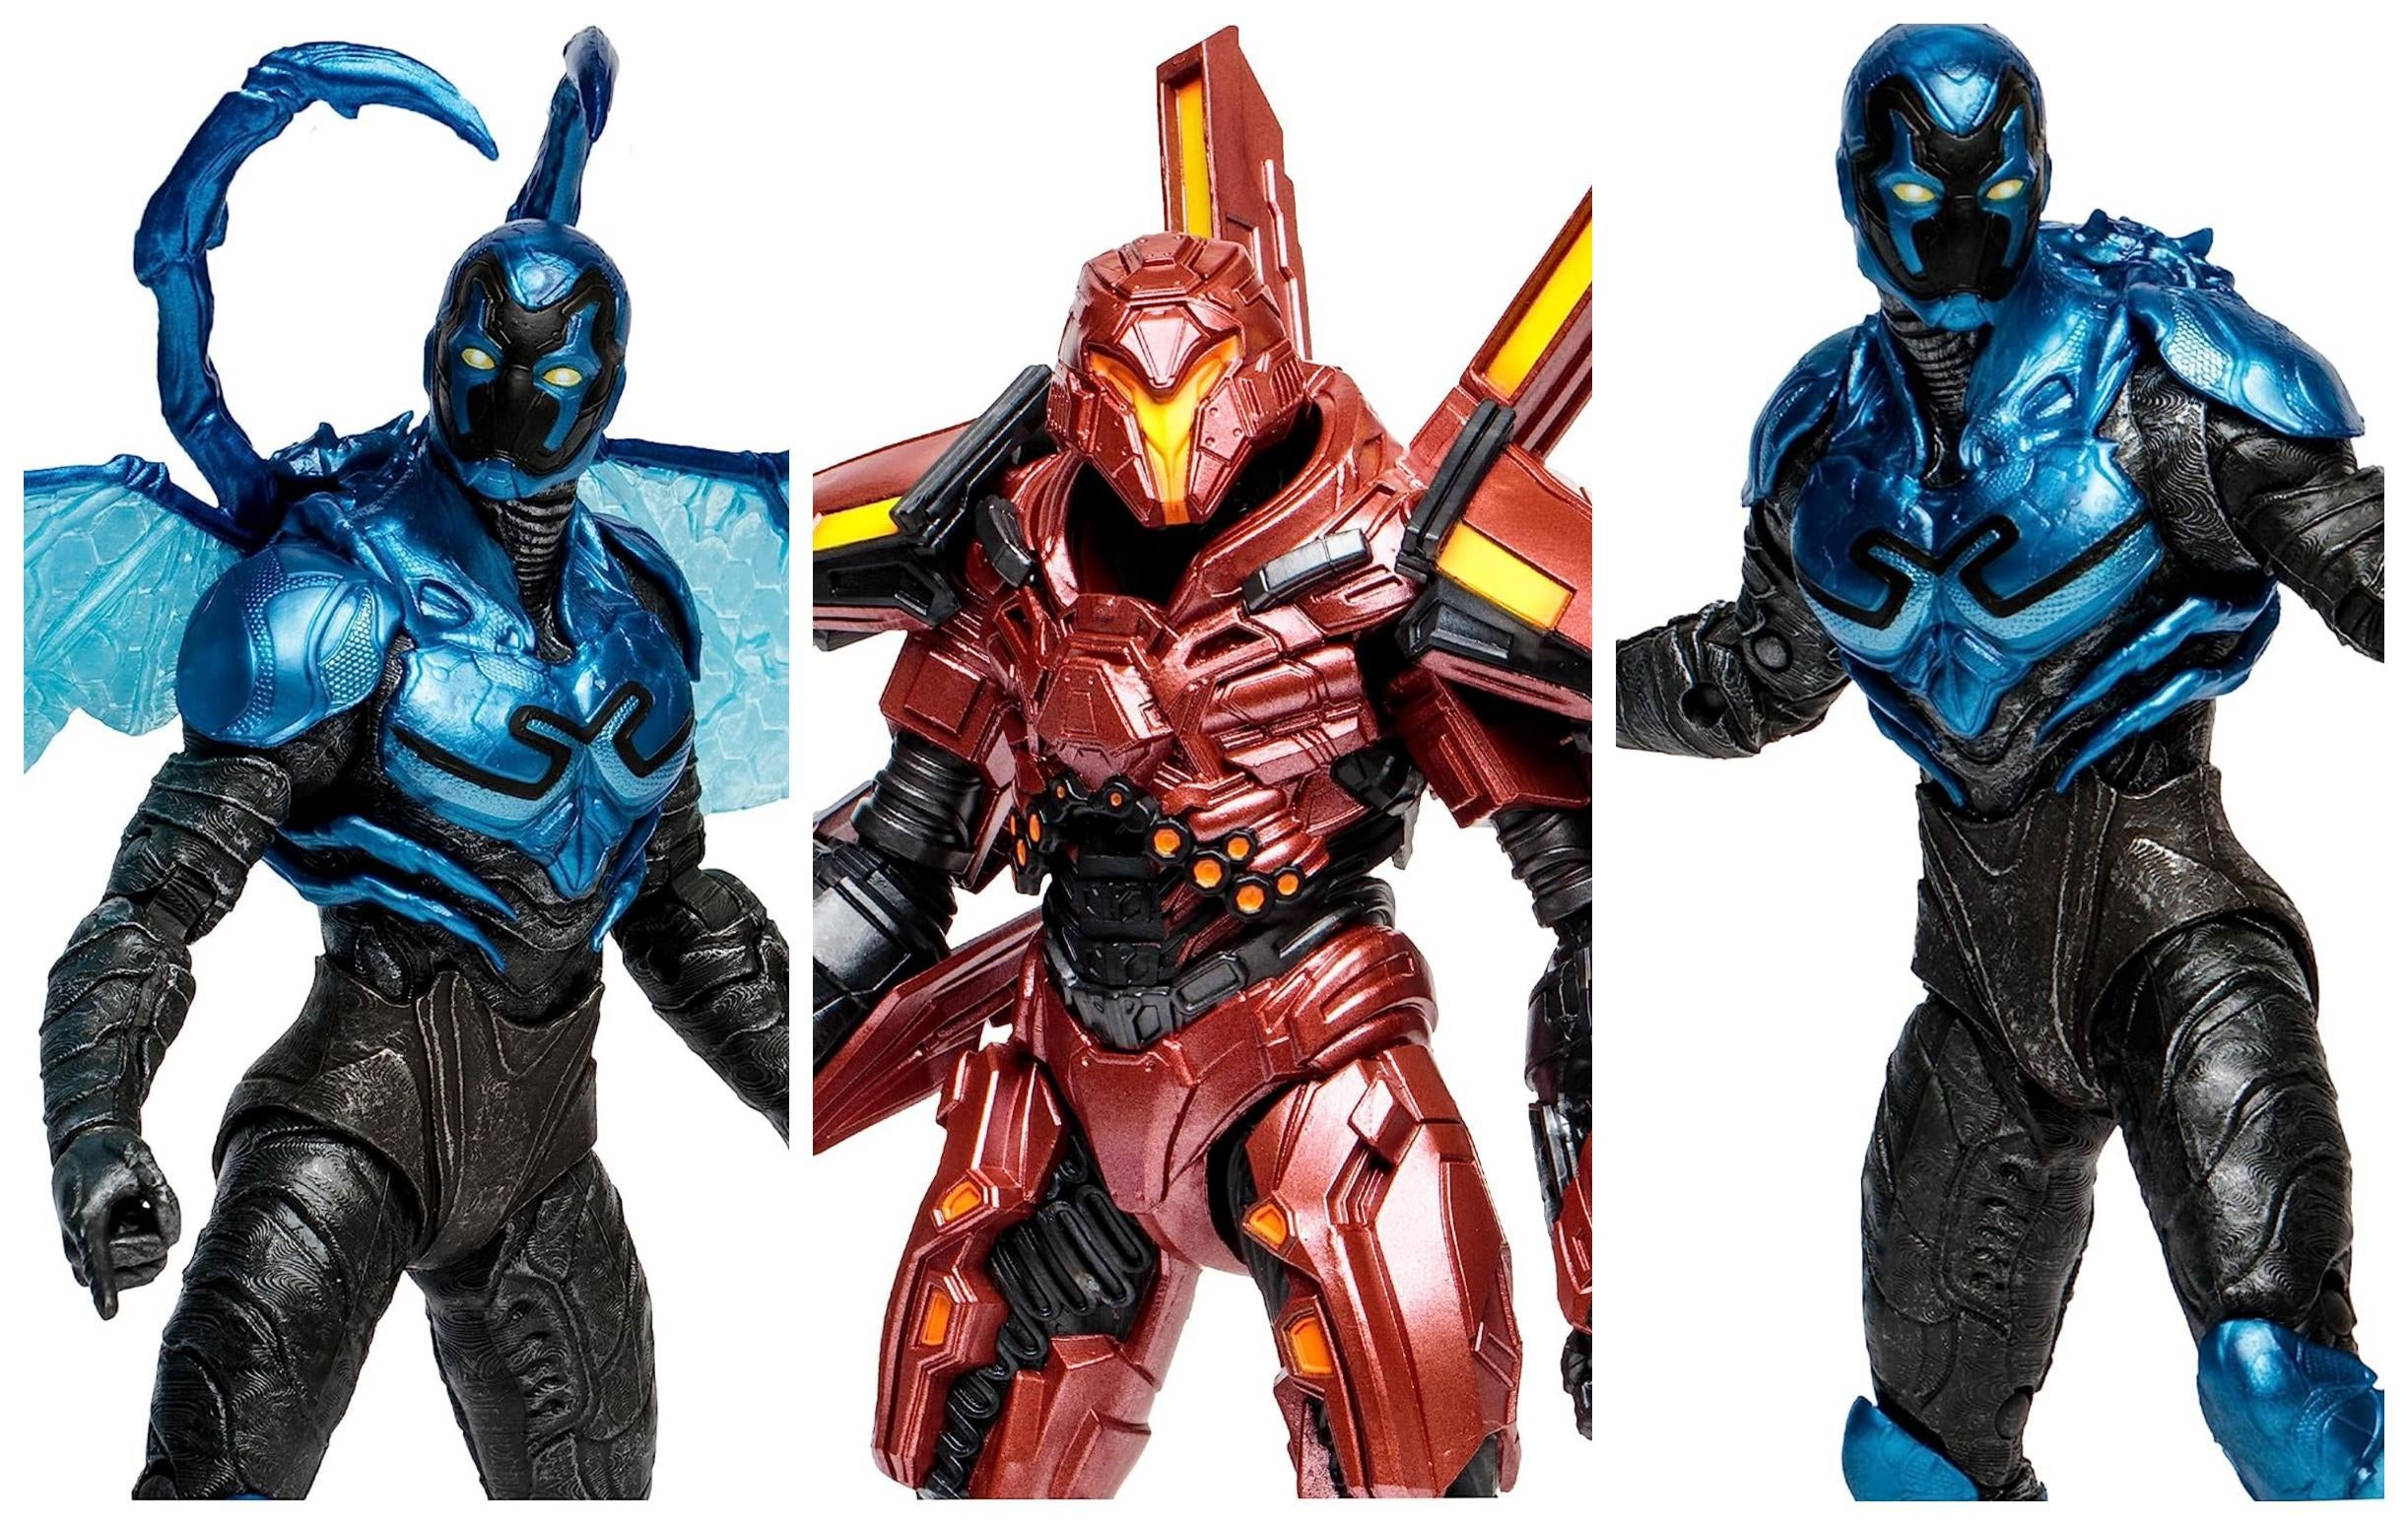 Blue Beetle Movie McFarlane Toys Figures Are Up for Pre-Order on